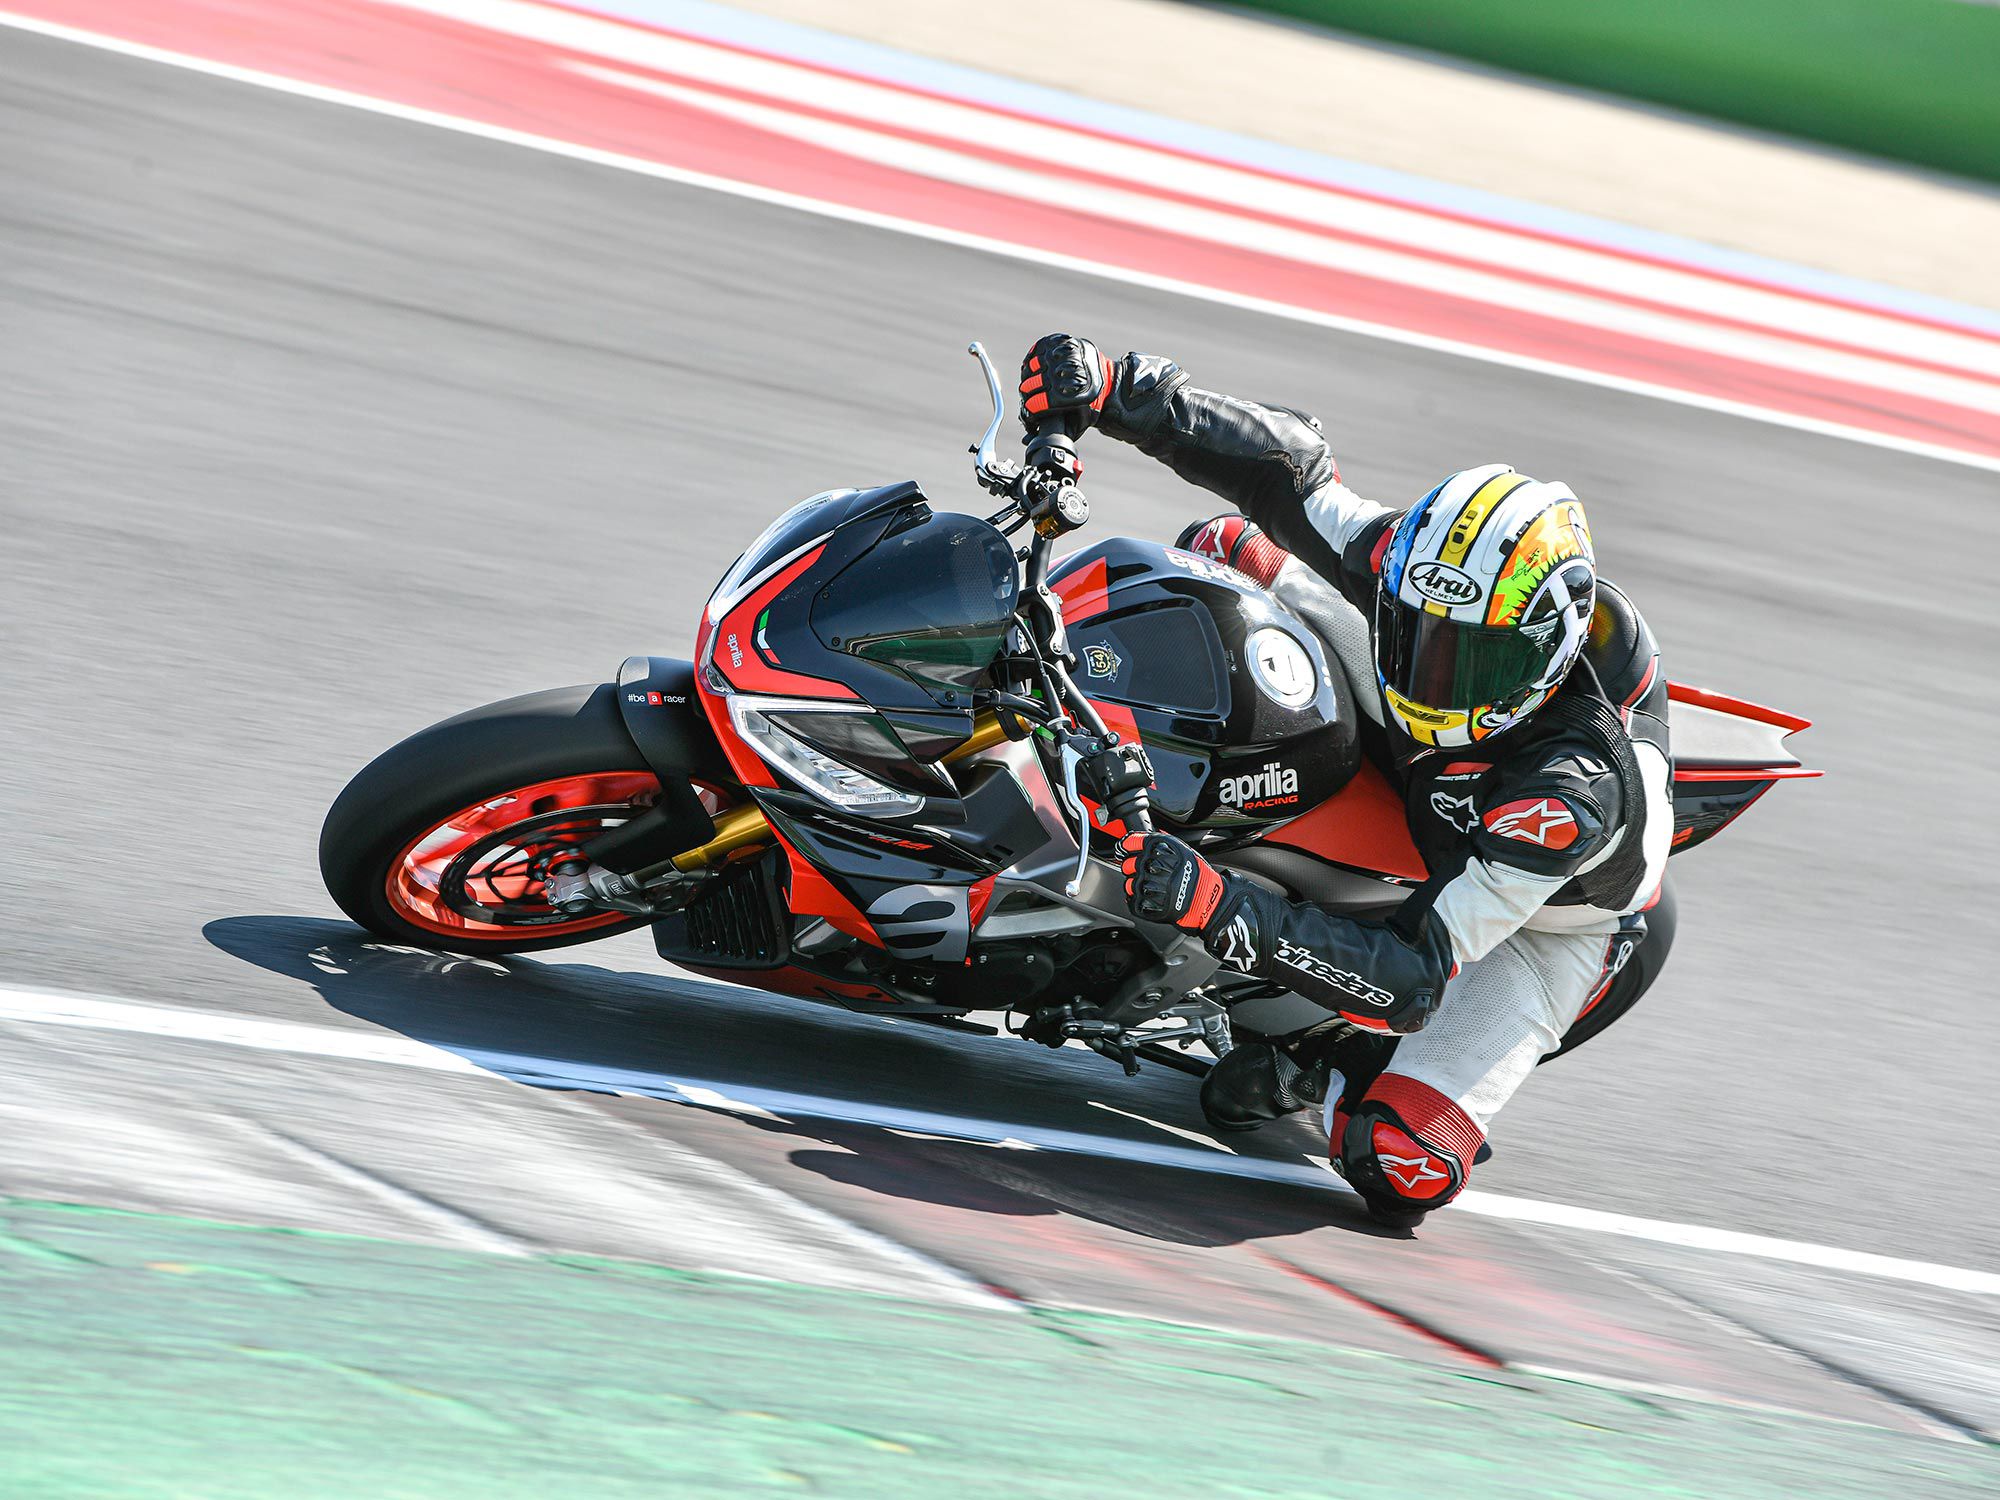 For 2021 Aprilia has produced two quite different versions of its hypernaked: the standard Tuono V4 and the Tuono V4 Factory, which we have on test.